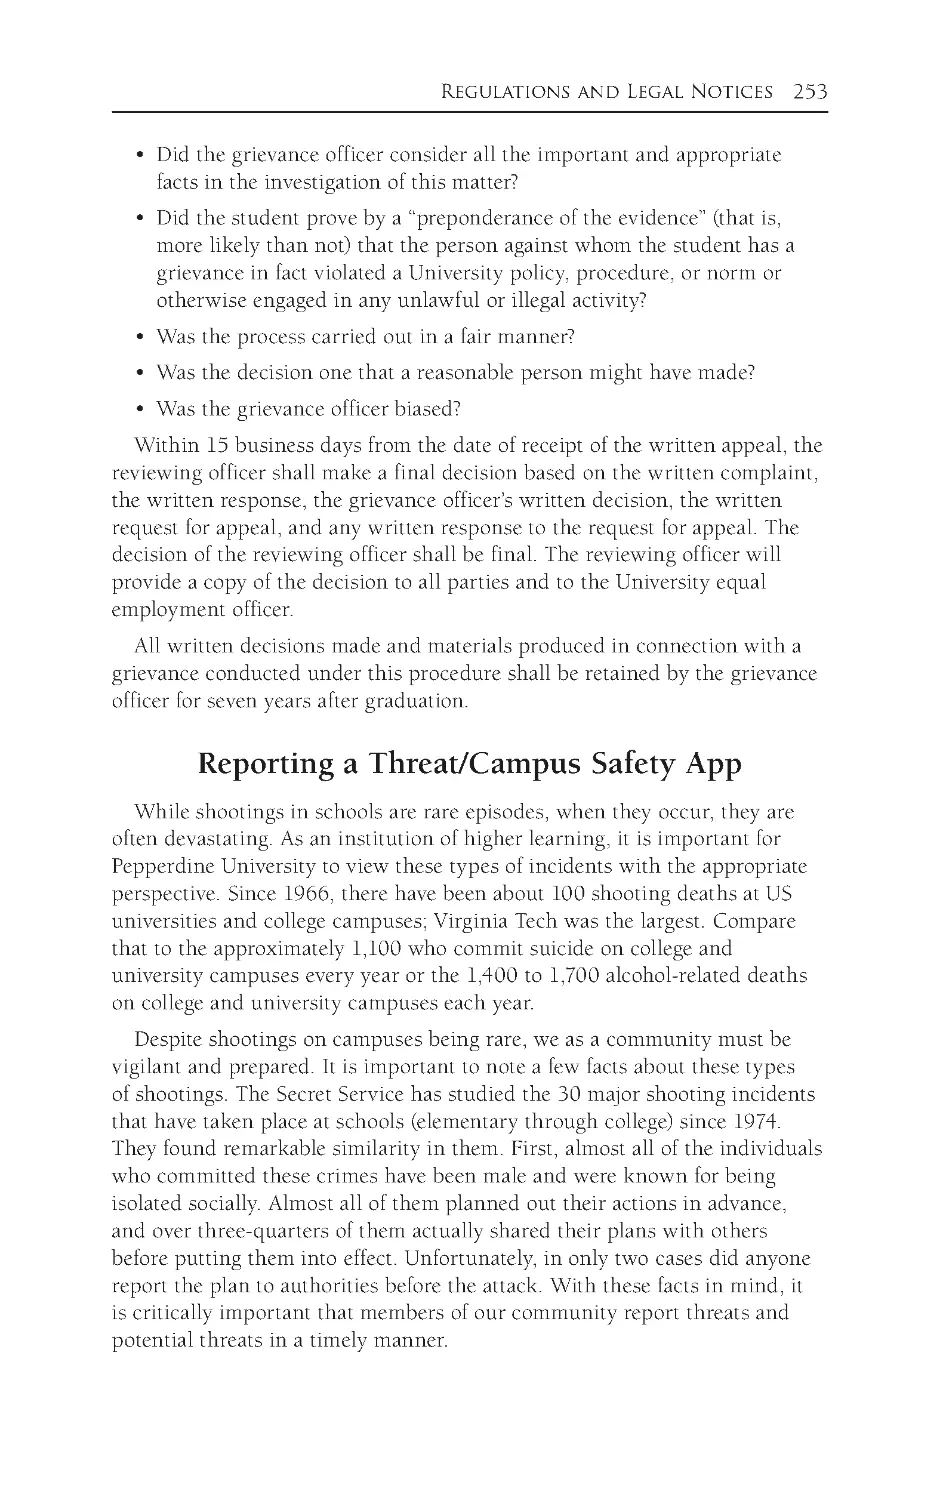 Reporting a Threat/Campus Safety App